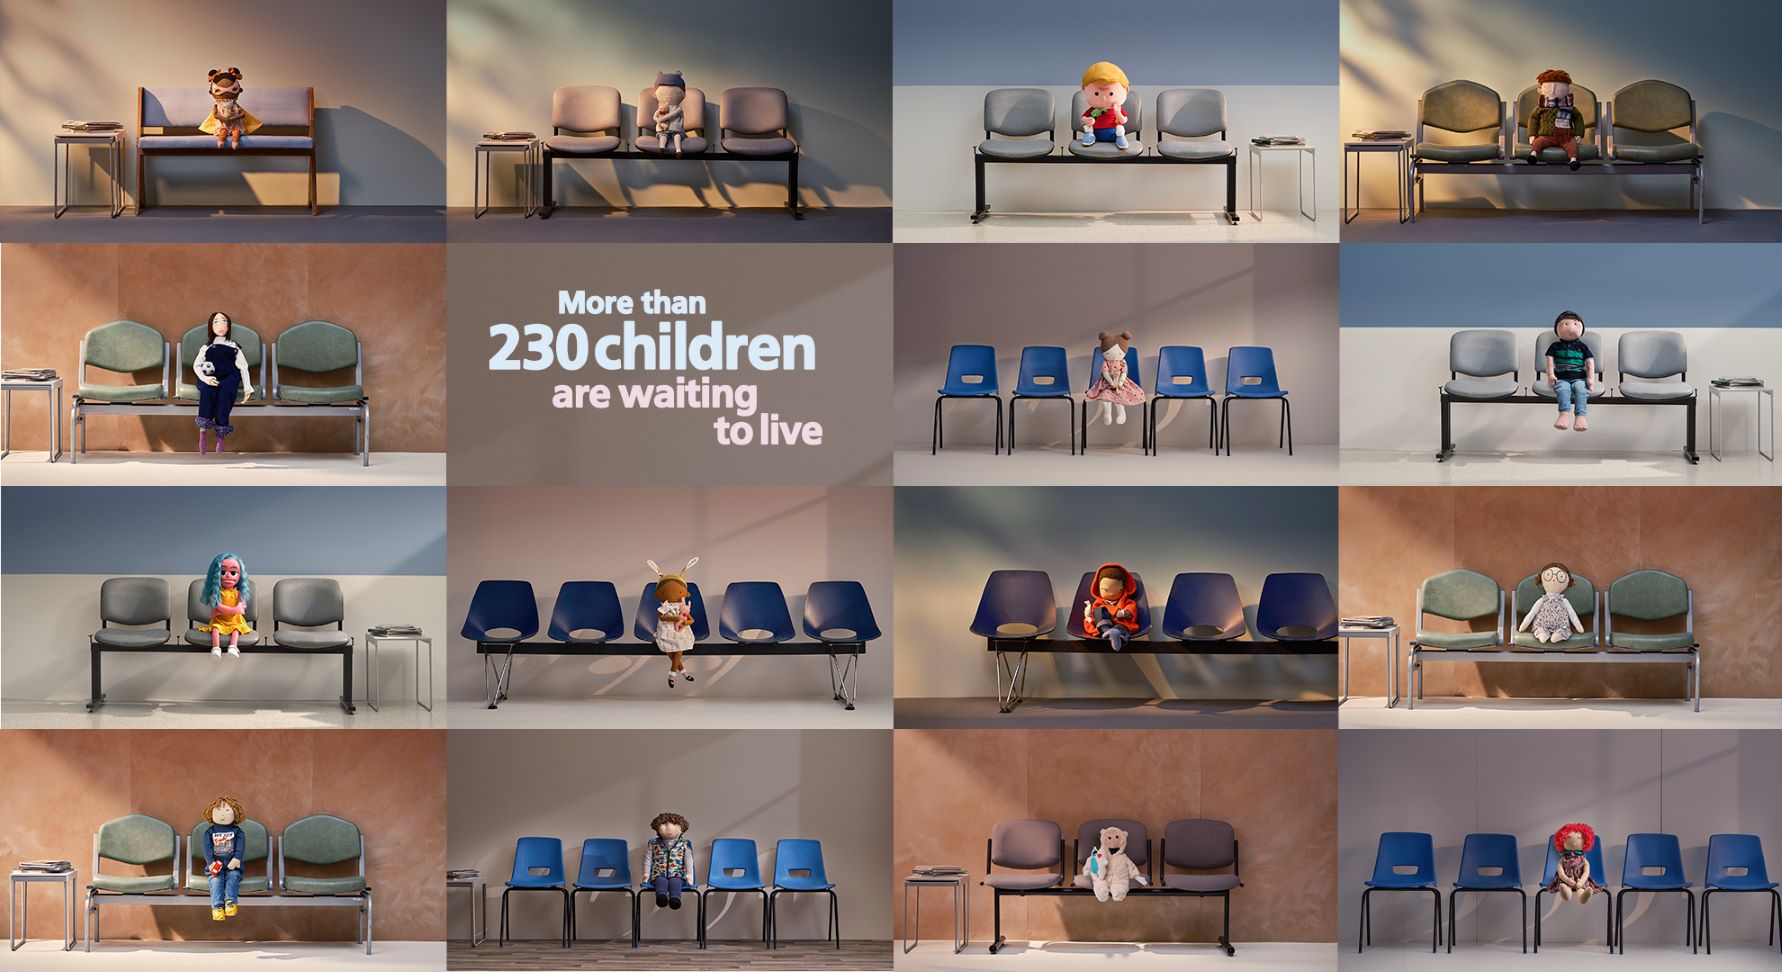 Waiting to live campaign image with message "more than 230 children are waiting to live"